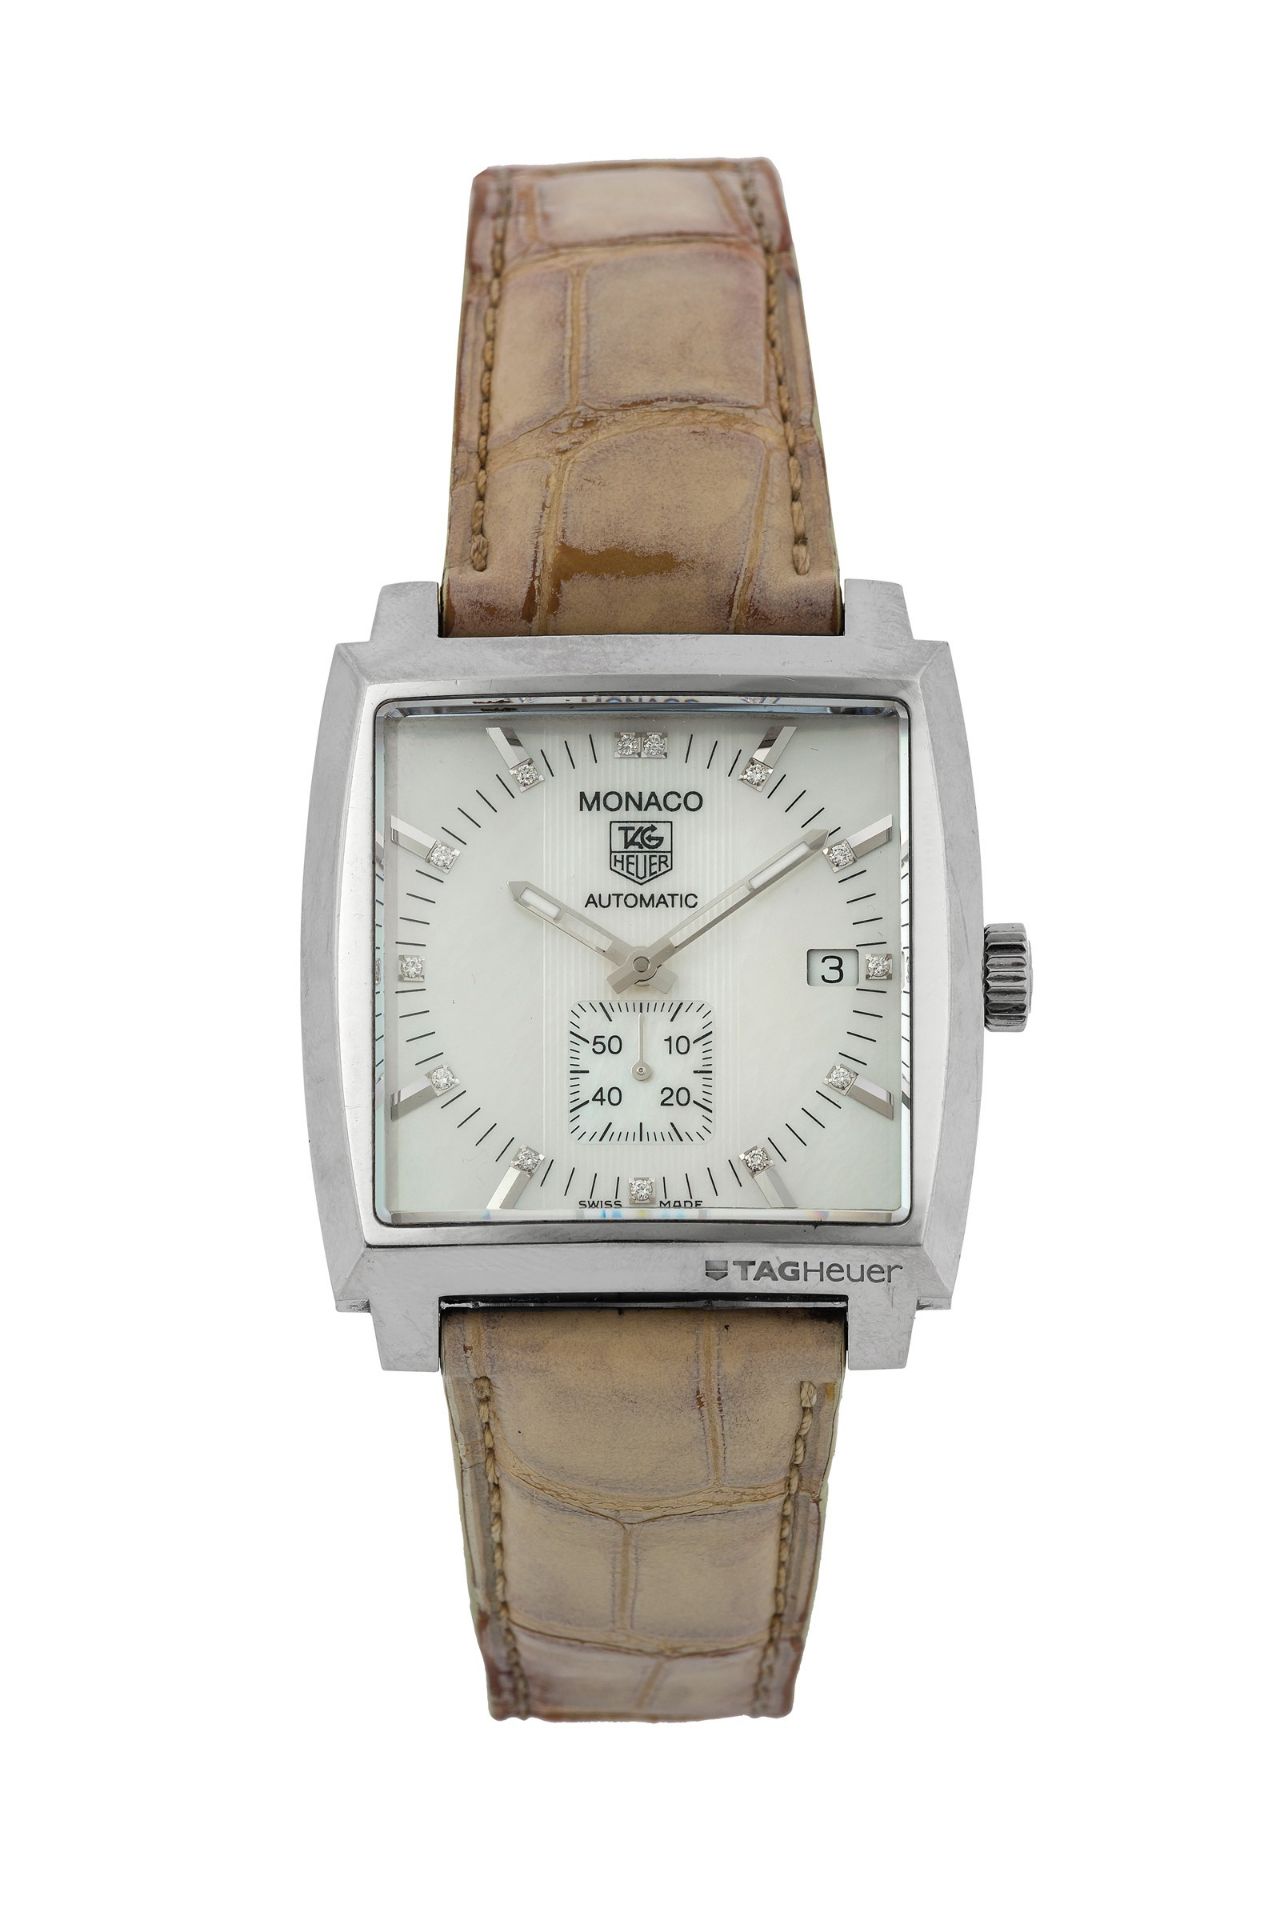 Tag Heuer, "Monaco", Ref. WW2113. - "Mother of Pearl Dial". Fine, stainless steel, [...]